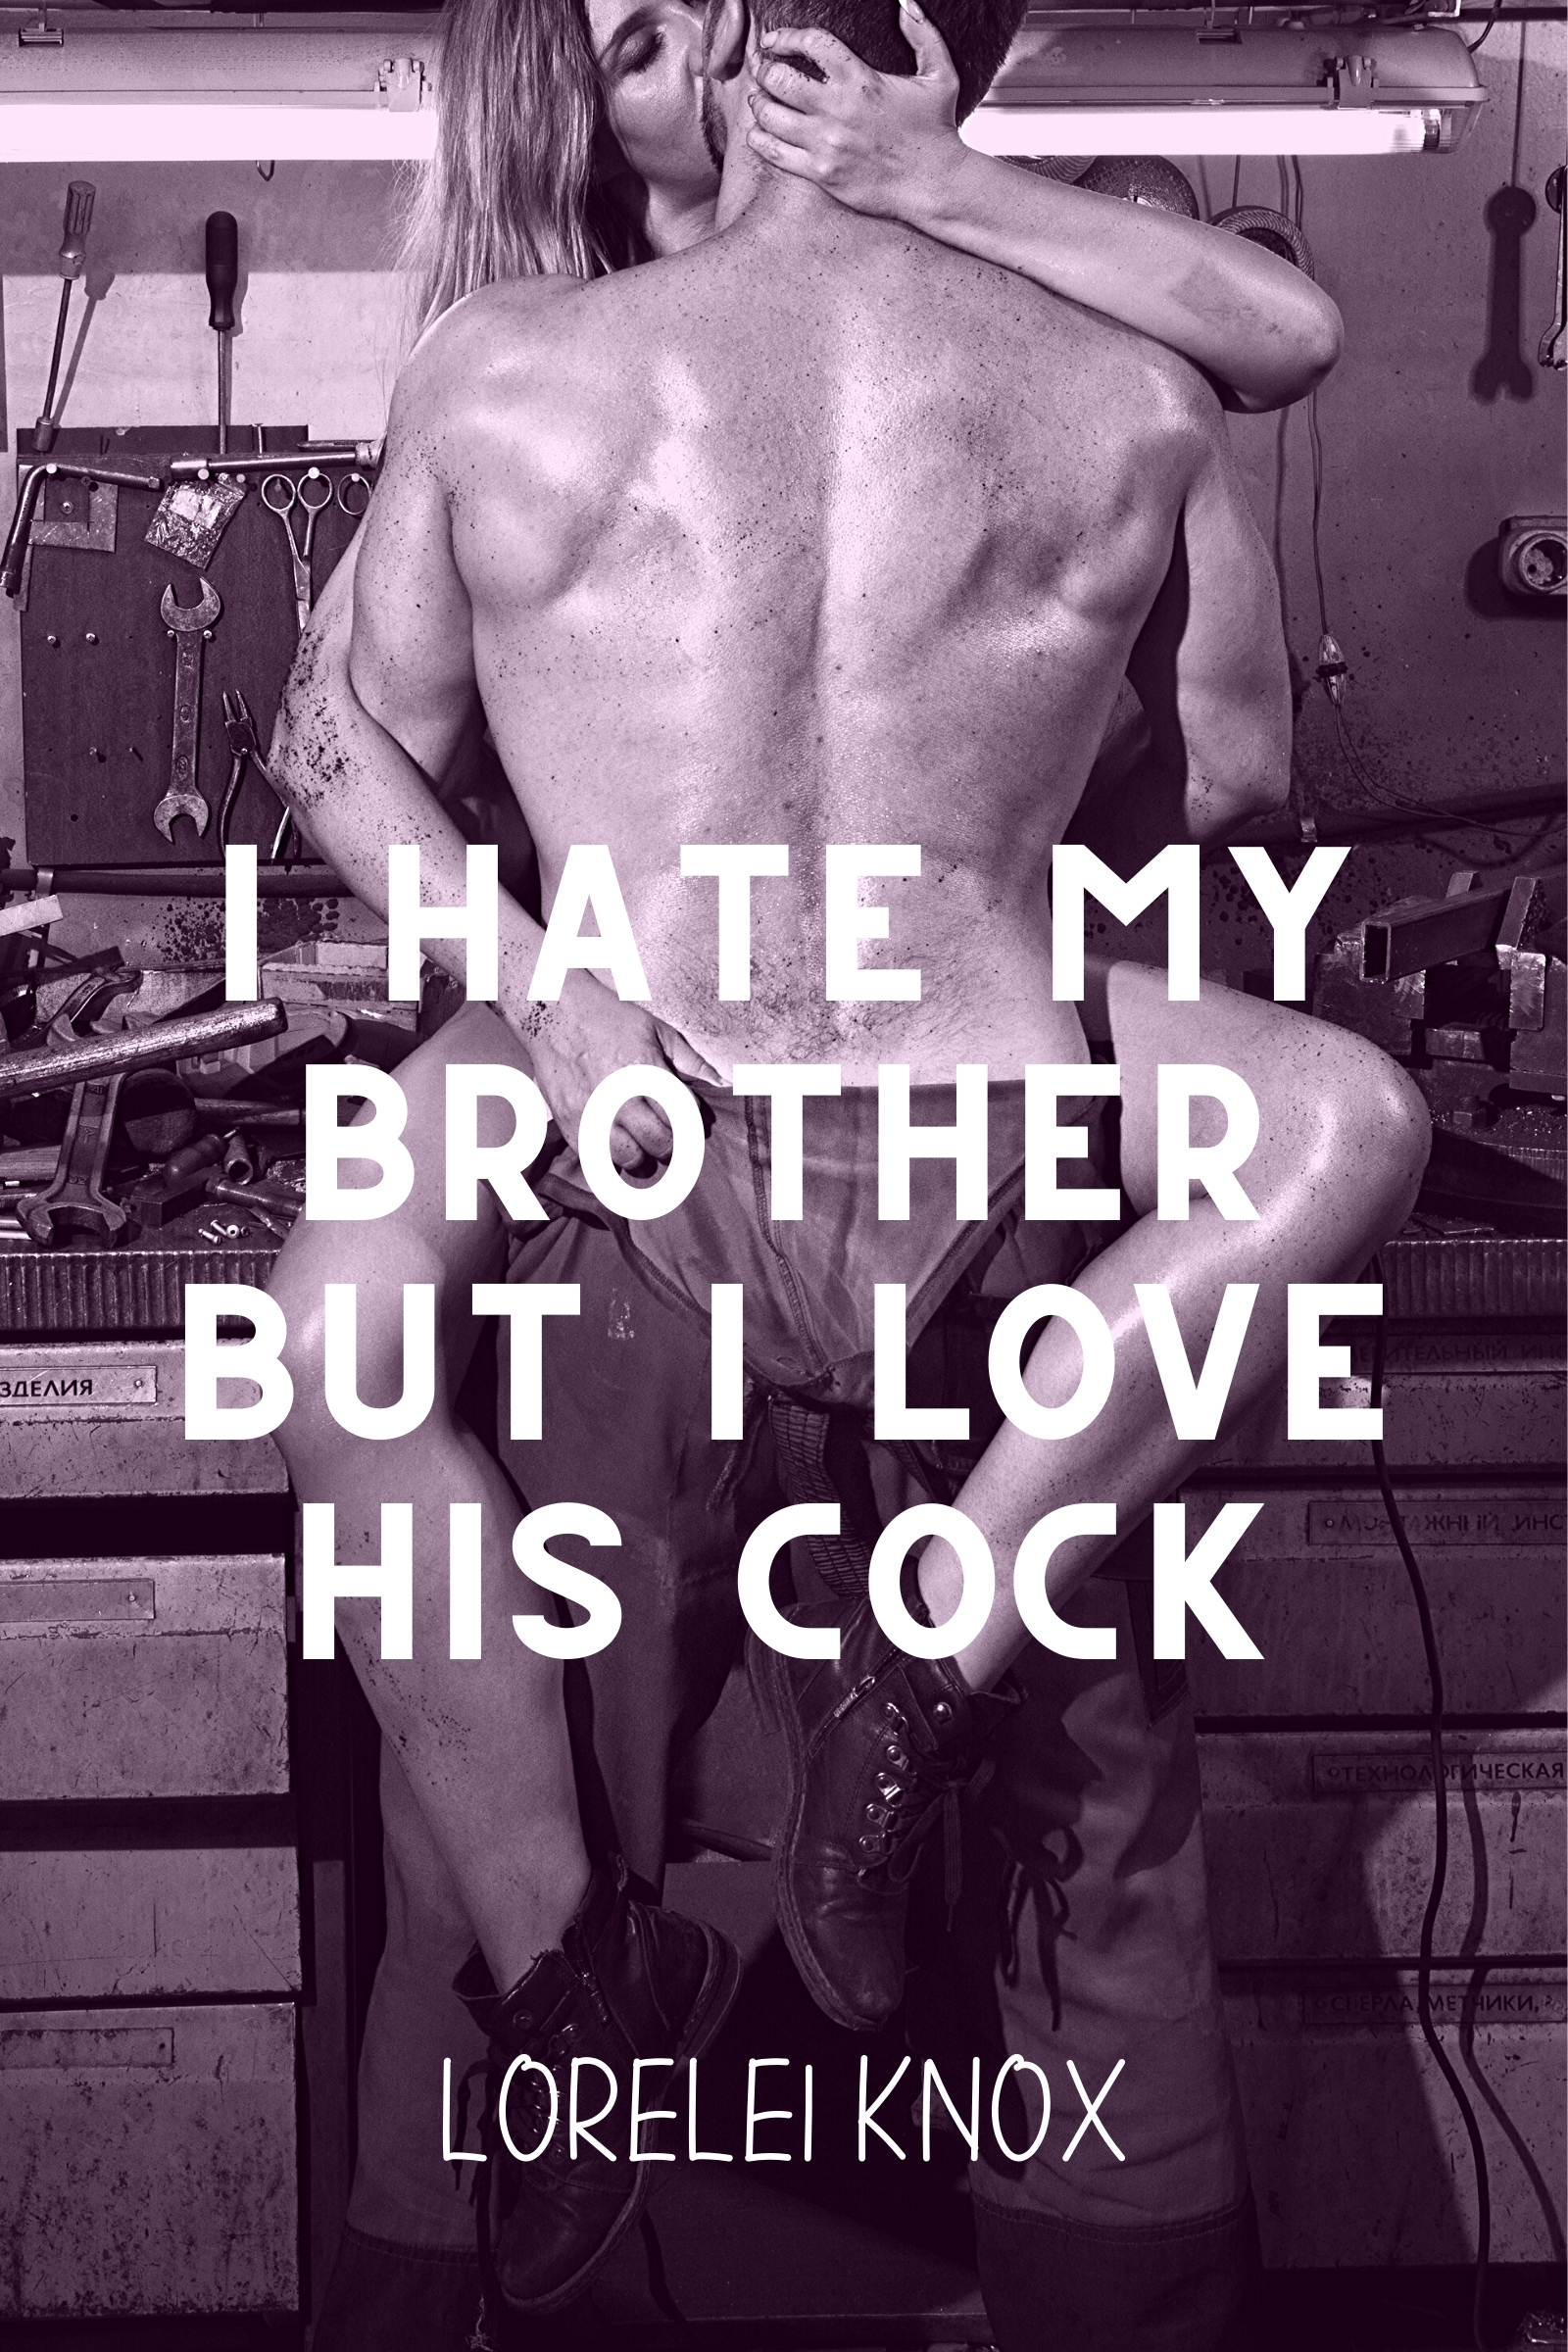 I Love My Brother's Cock